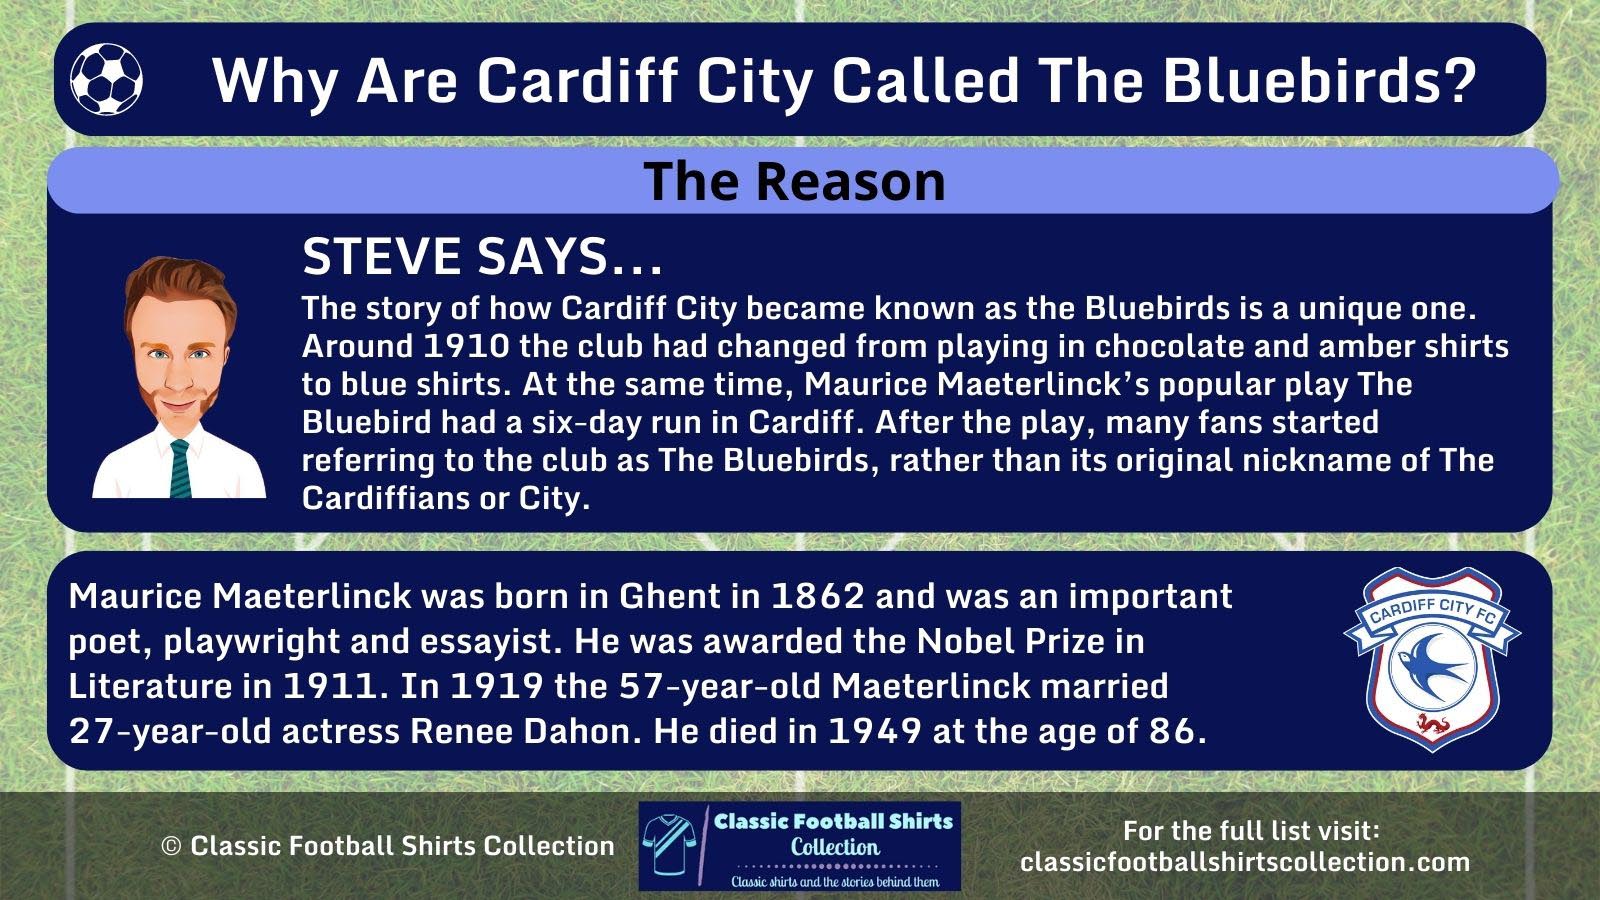 Cardiff City star believes Bluebirds can capitalise upon Swansea